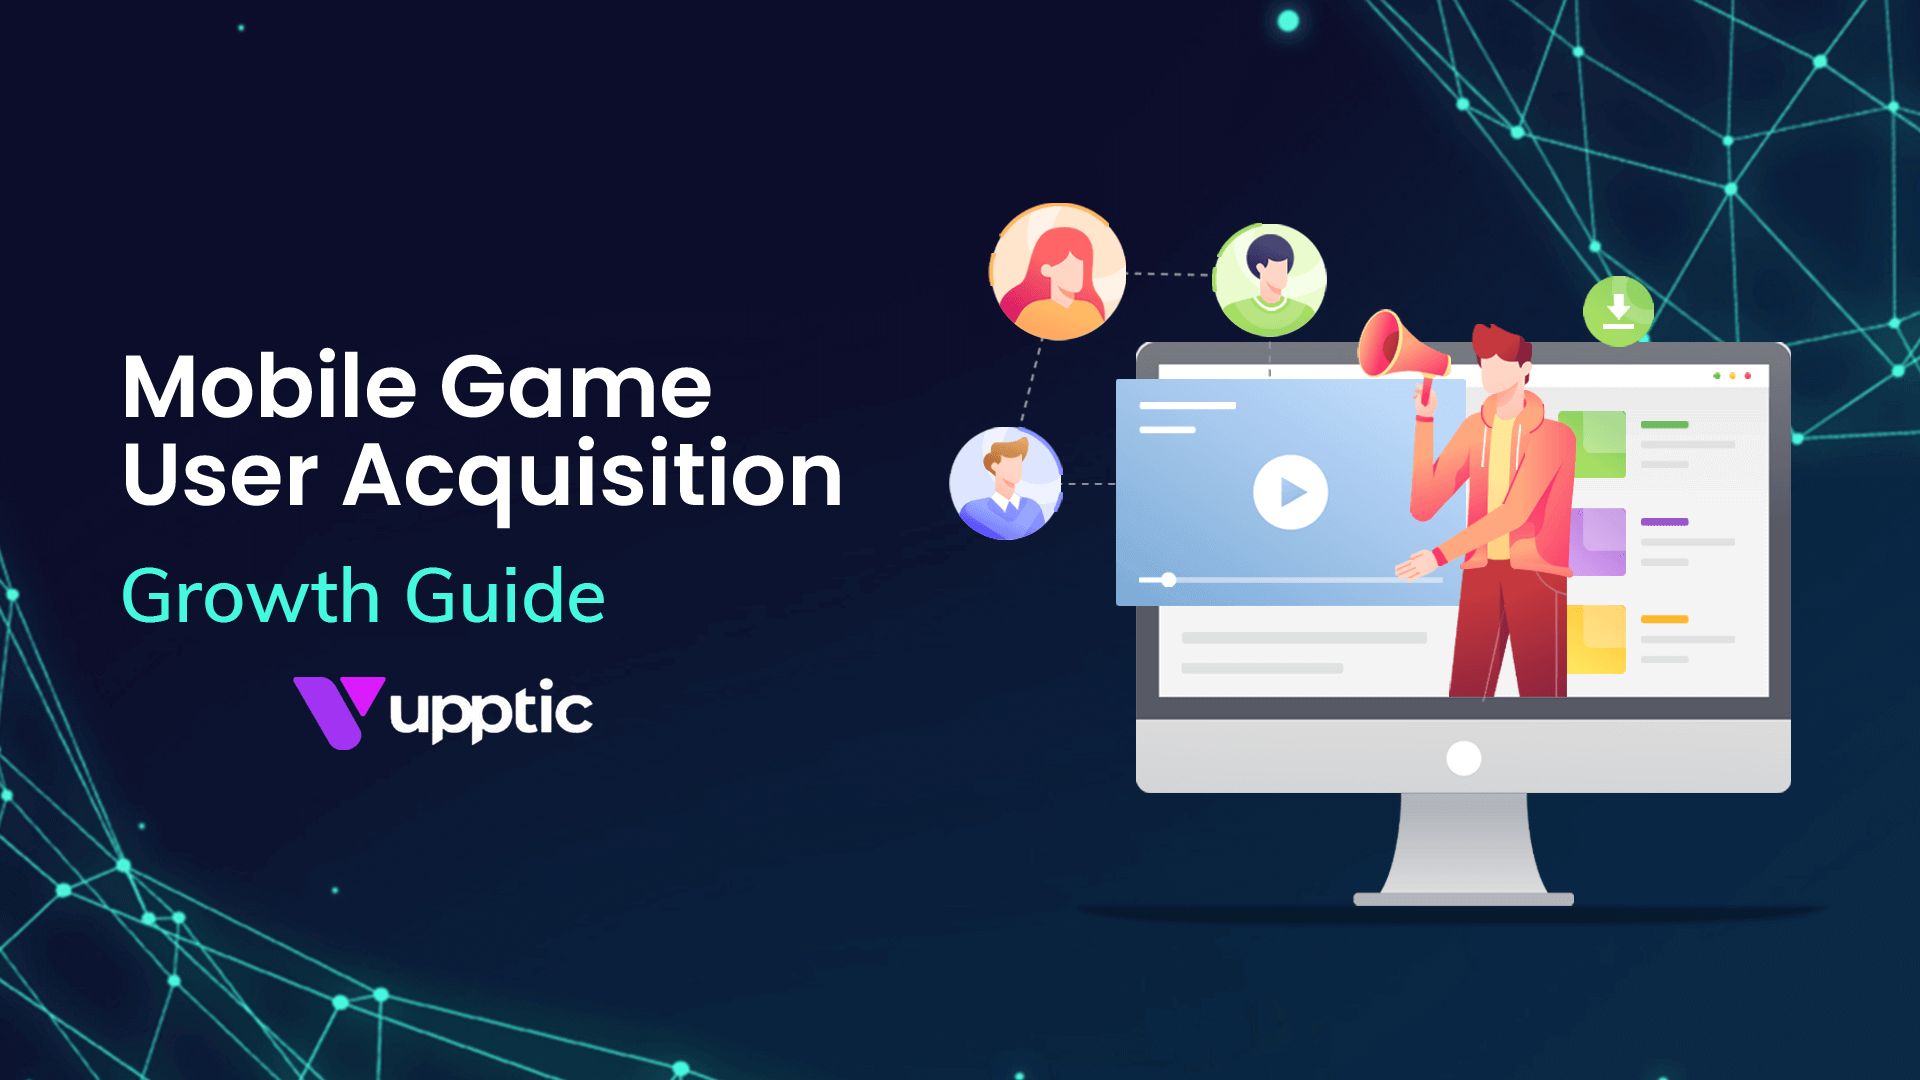 Mobile Game User Acquisition Growth Guide by Upptic